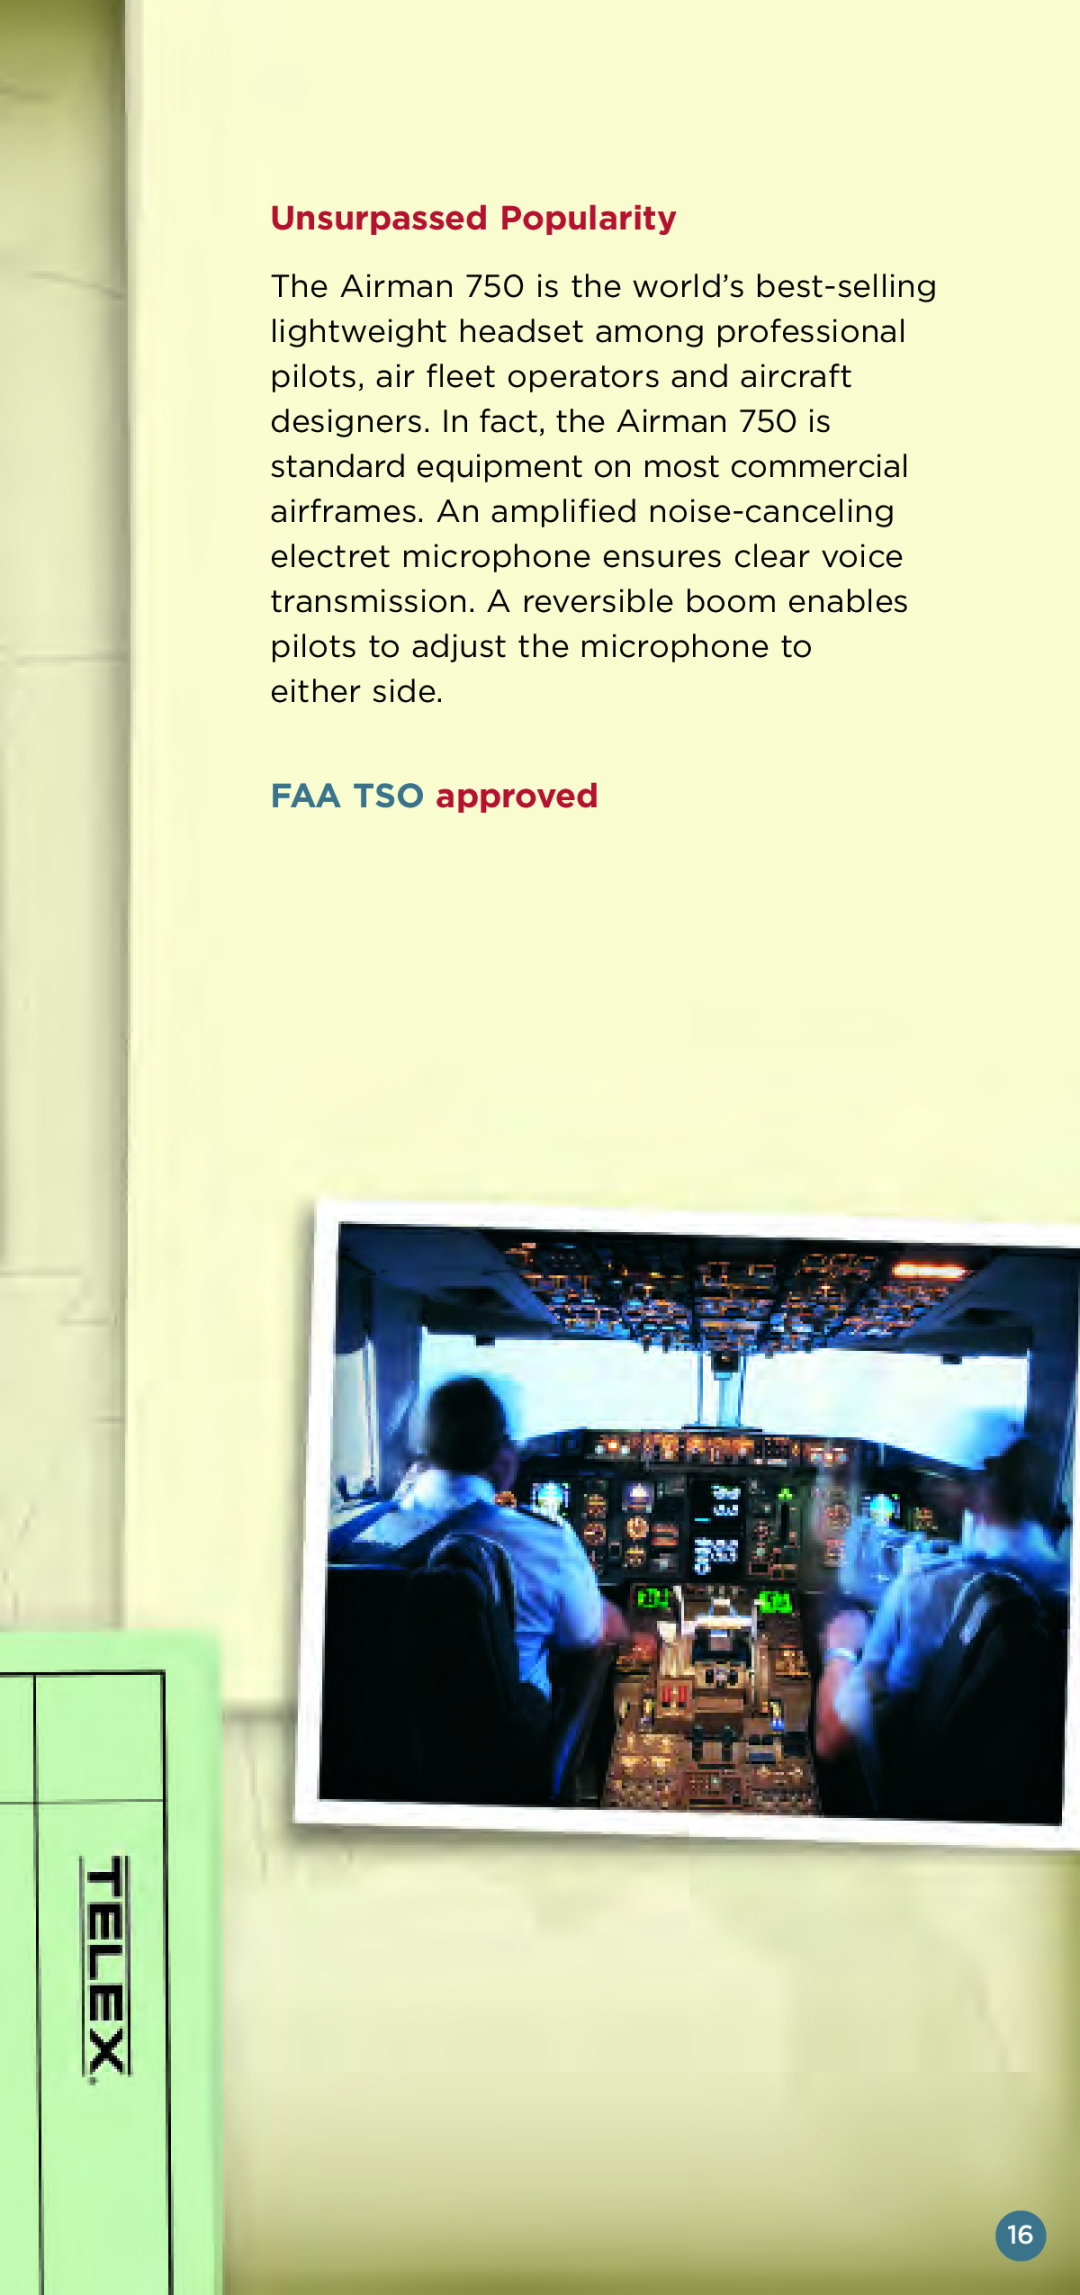 Telex Aviation Headsets manual Unsurpassed Popularity, FAA TSO approved 